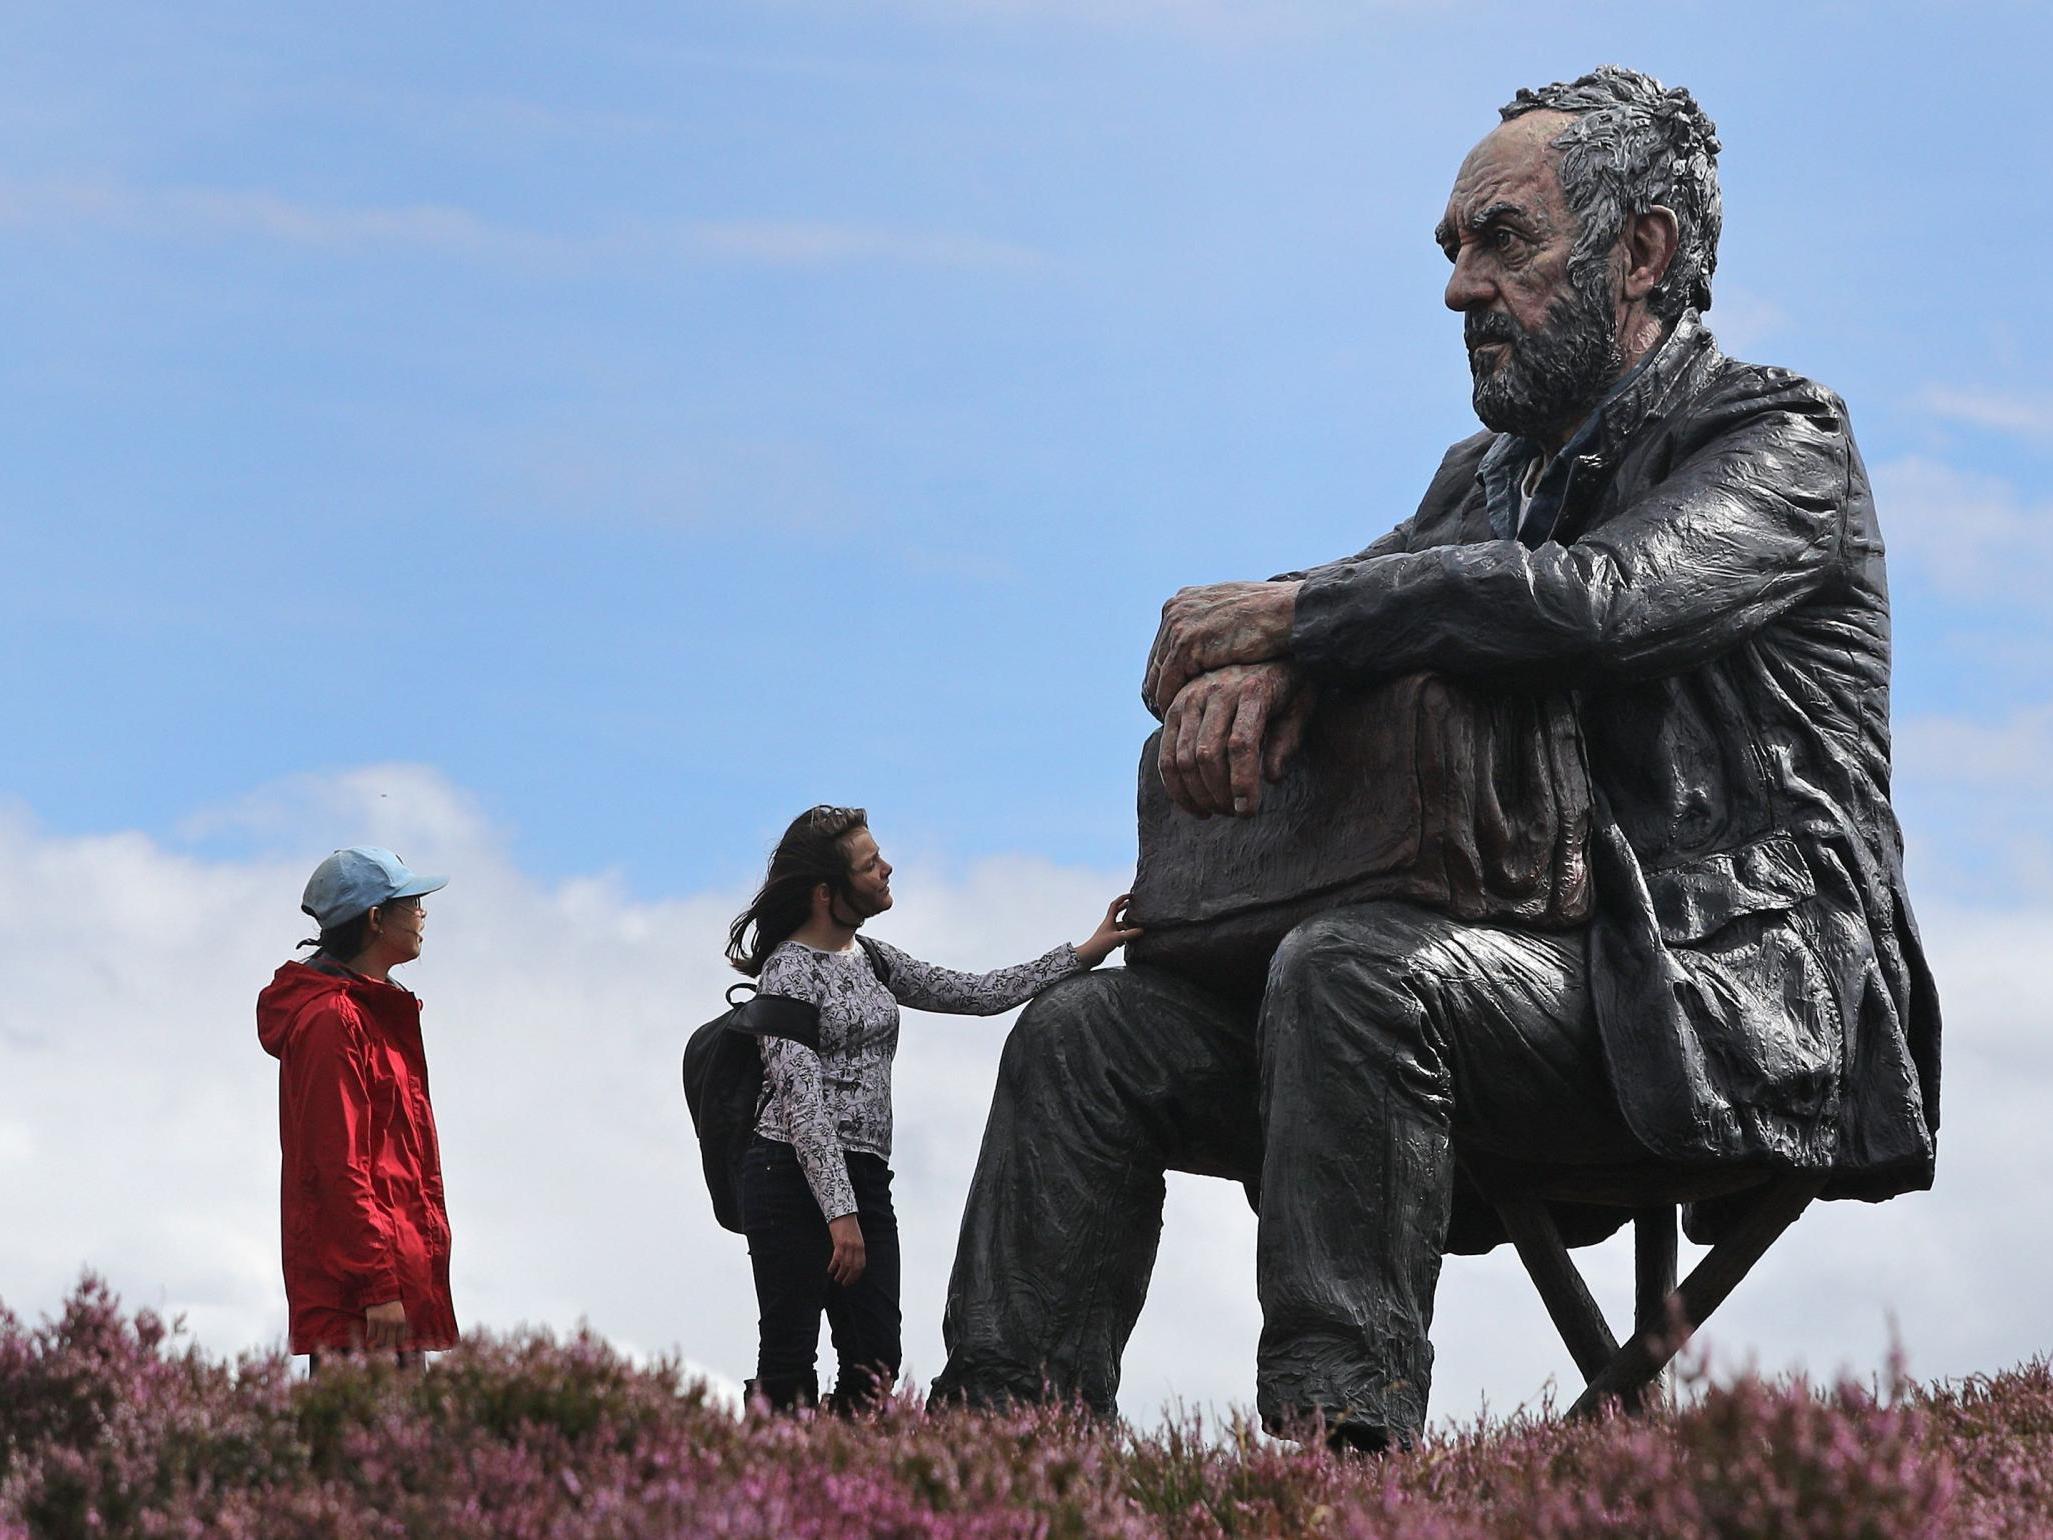 Tourists visit Sean Henry's Seated Figure on the North York Moors in 2017